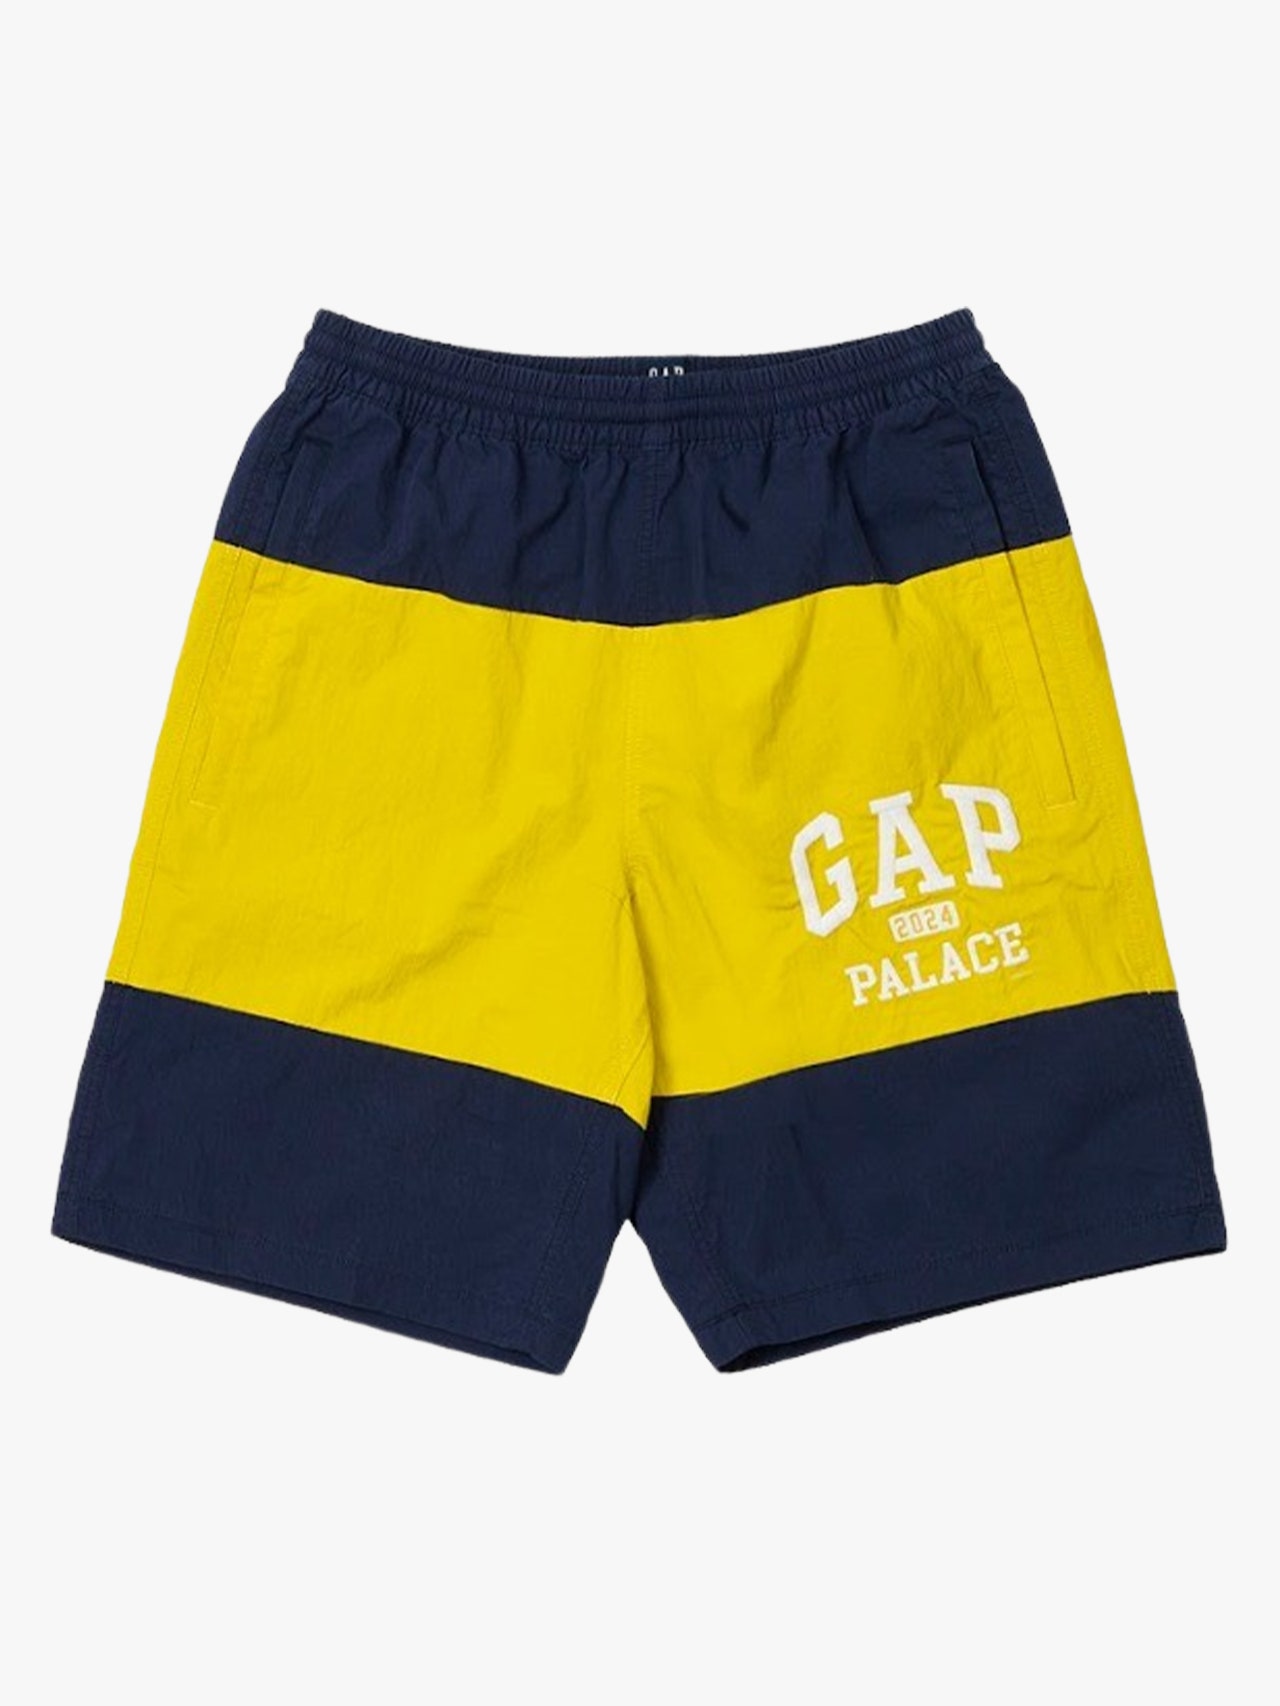 Cheery lightweight shorts that work just as well on deck as they do out in the concrete jungle.<p>Sign up for GQ’s Daily newsletter and get everything from breaking fashion news to celebrity profiles to exclusive daily deals sent straight to your inbox.</p><a href="https://www.gq.com/newsletter/daily?sourceCode=msnsend">Sign Up Now</a>